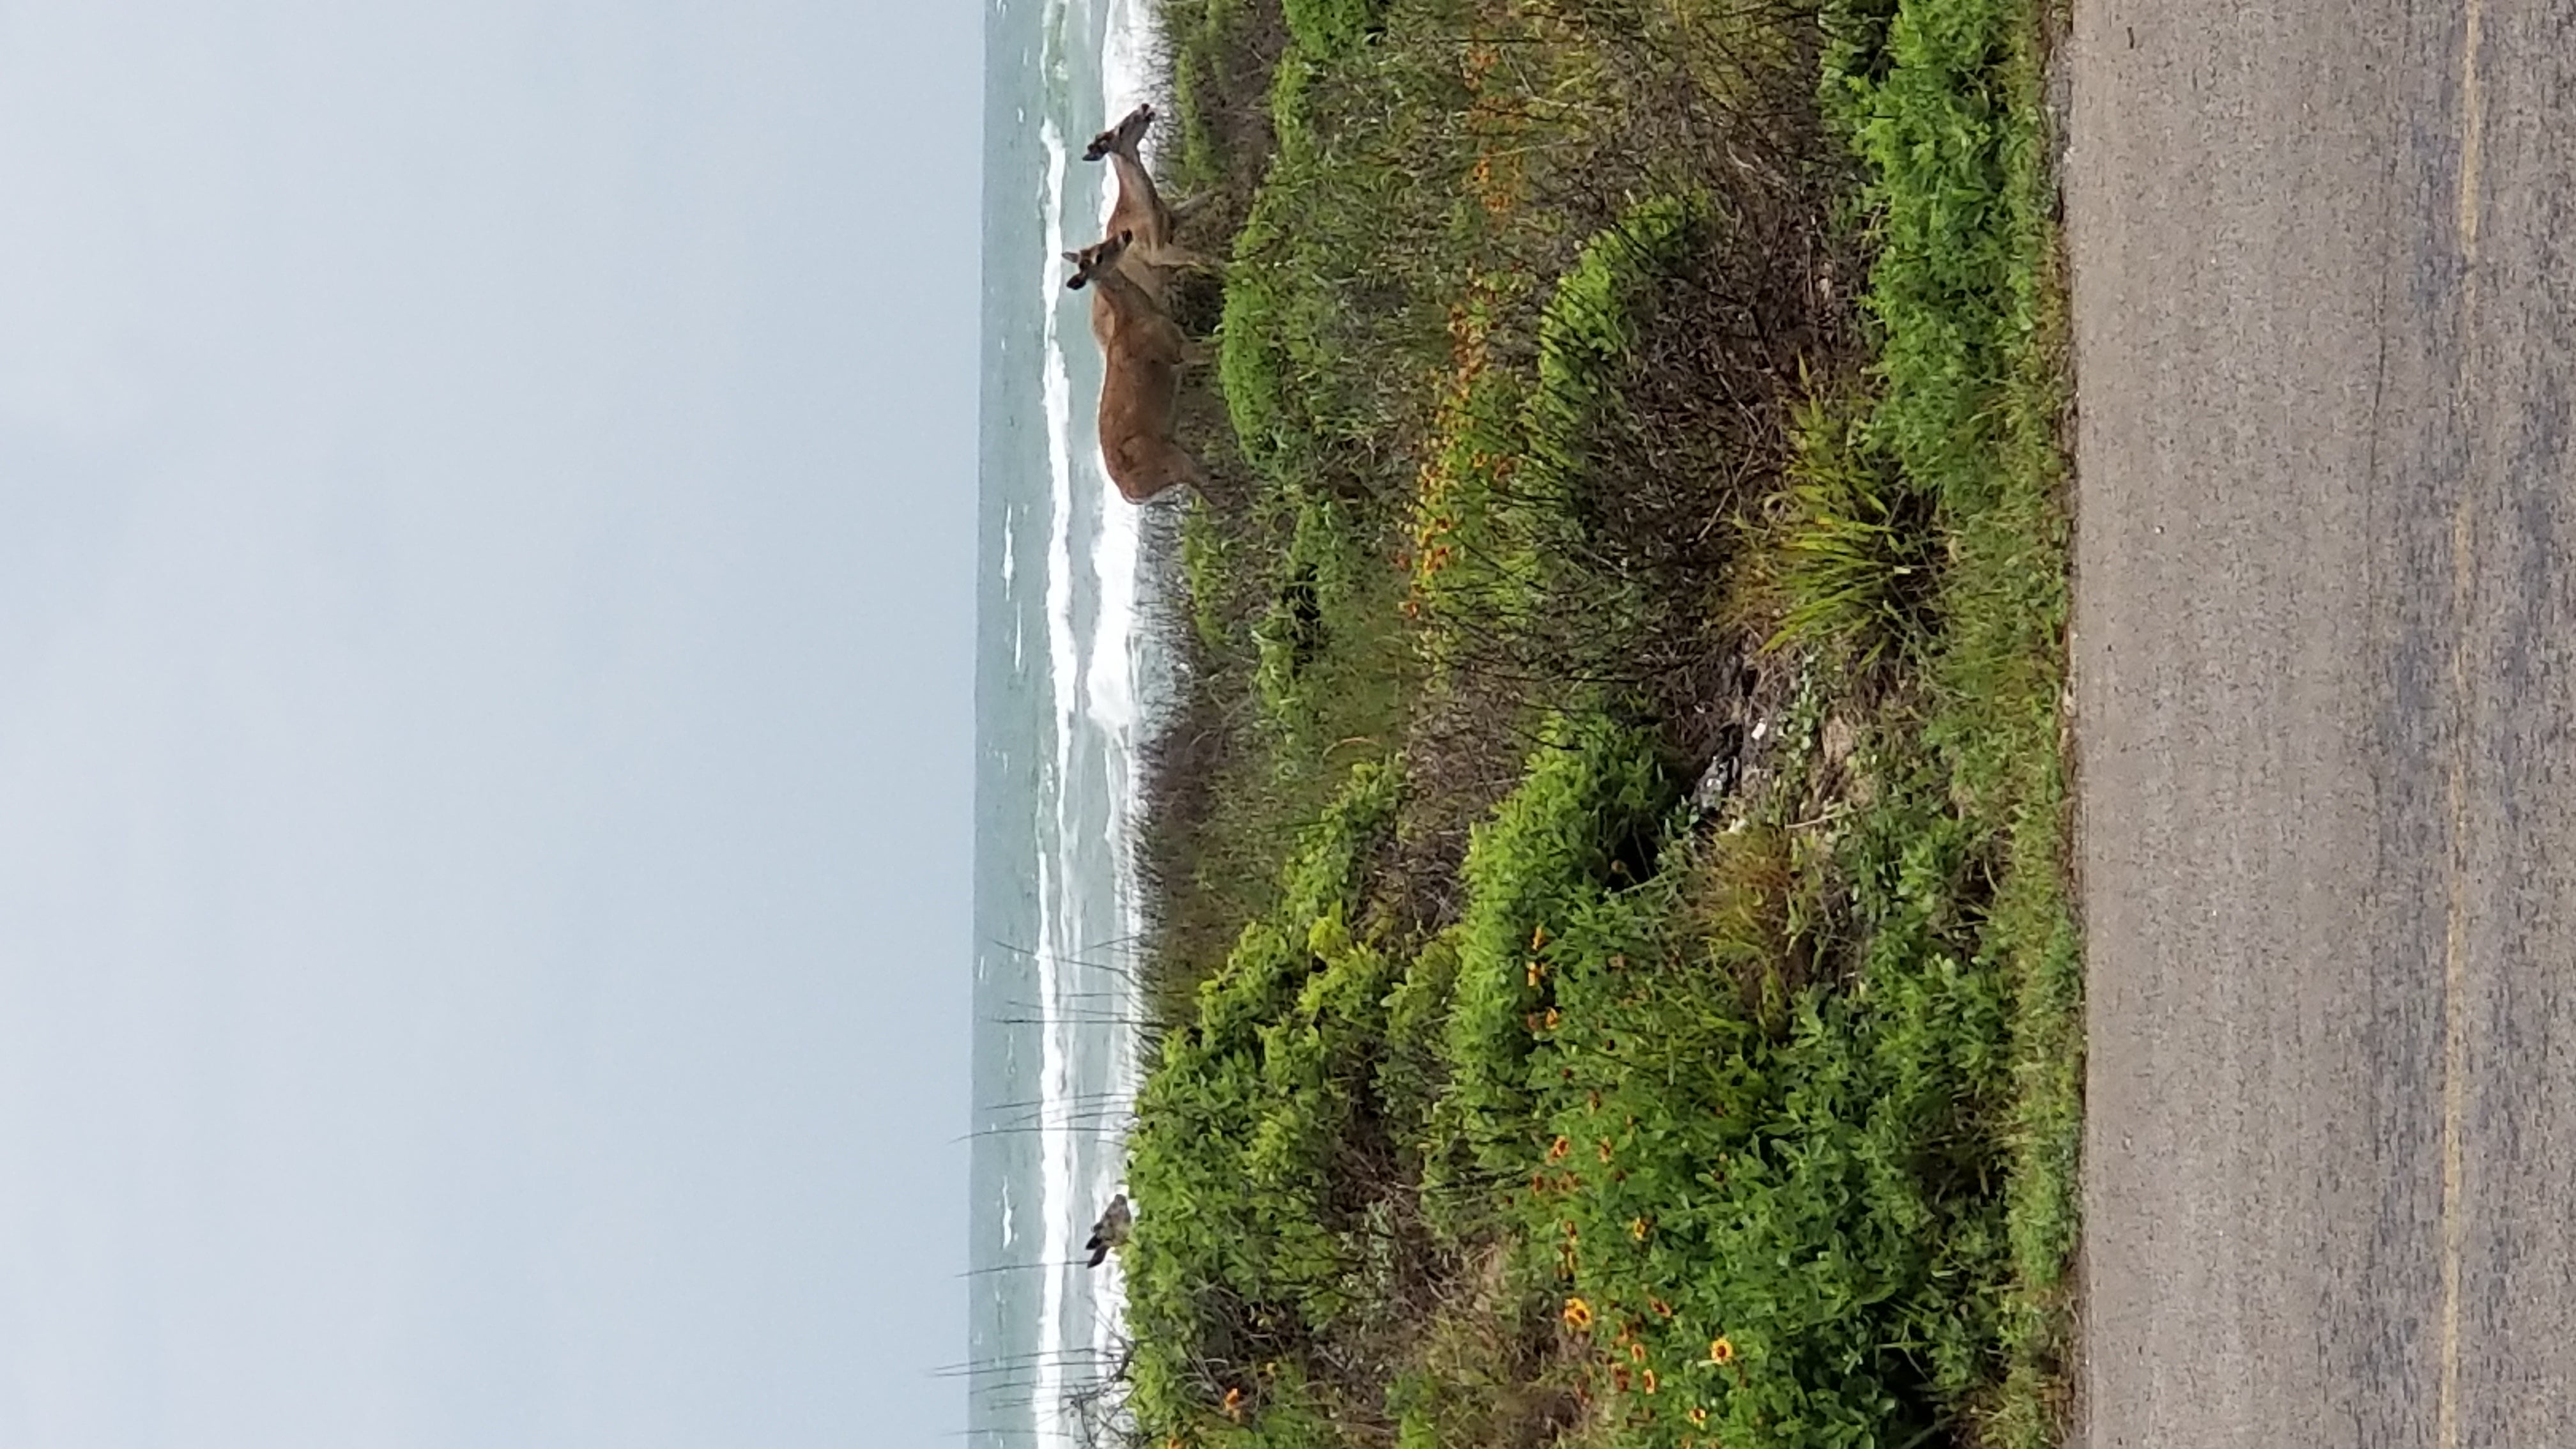 The deer often come to graze on the dune grass early morning or late afternoon/evening.